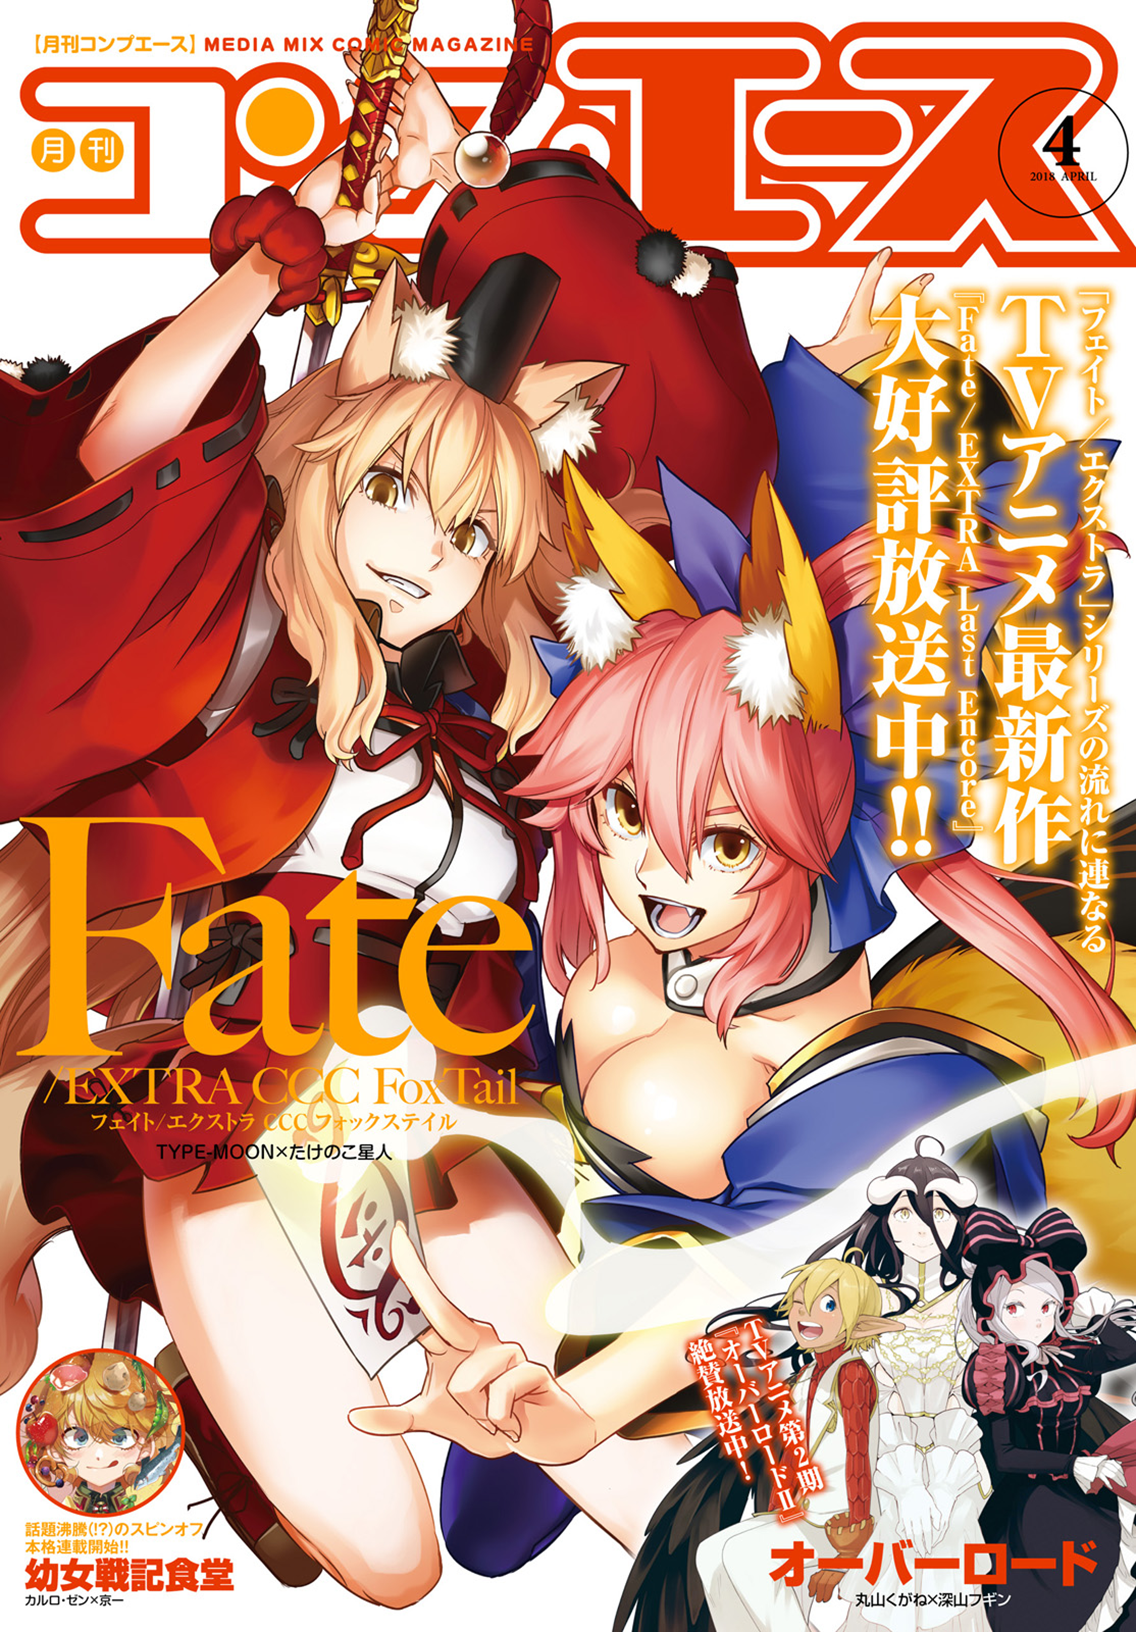 Fate/extra Ccc - Foxtail Chapter 45: Replica 1 - Picture 1